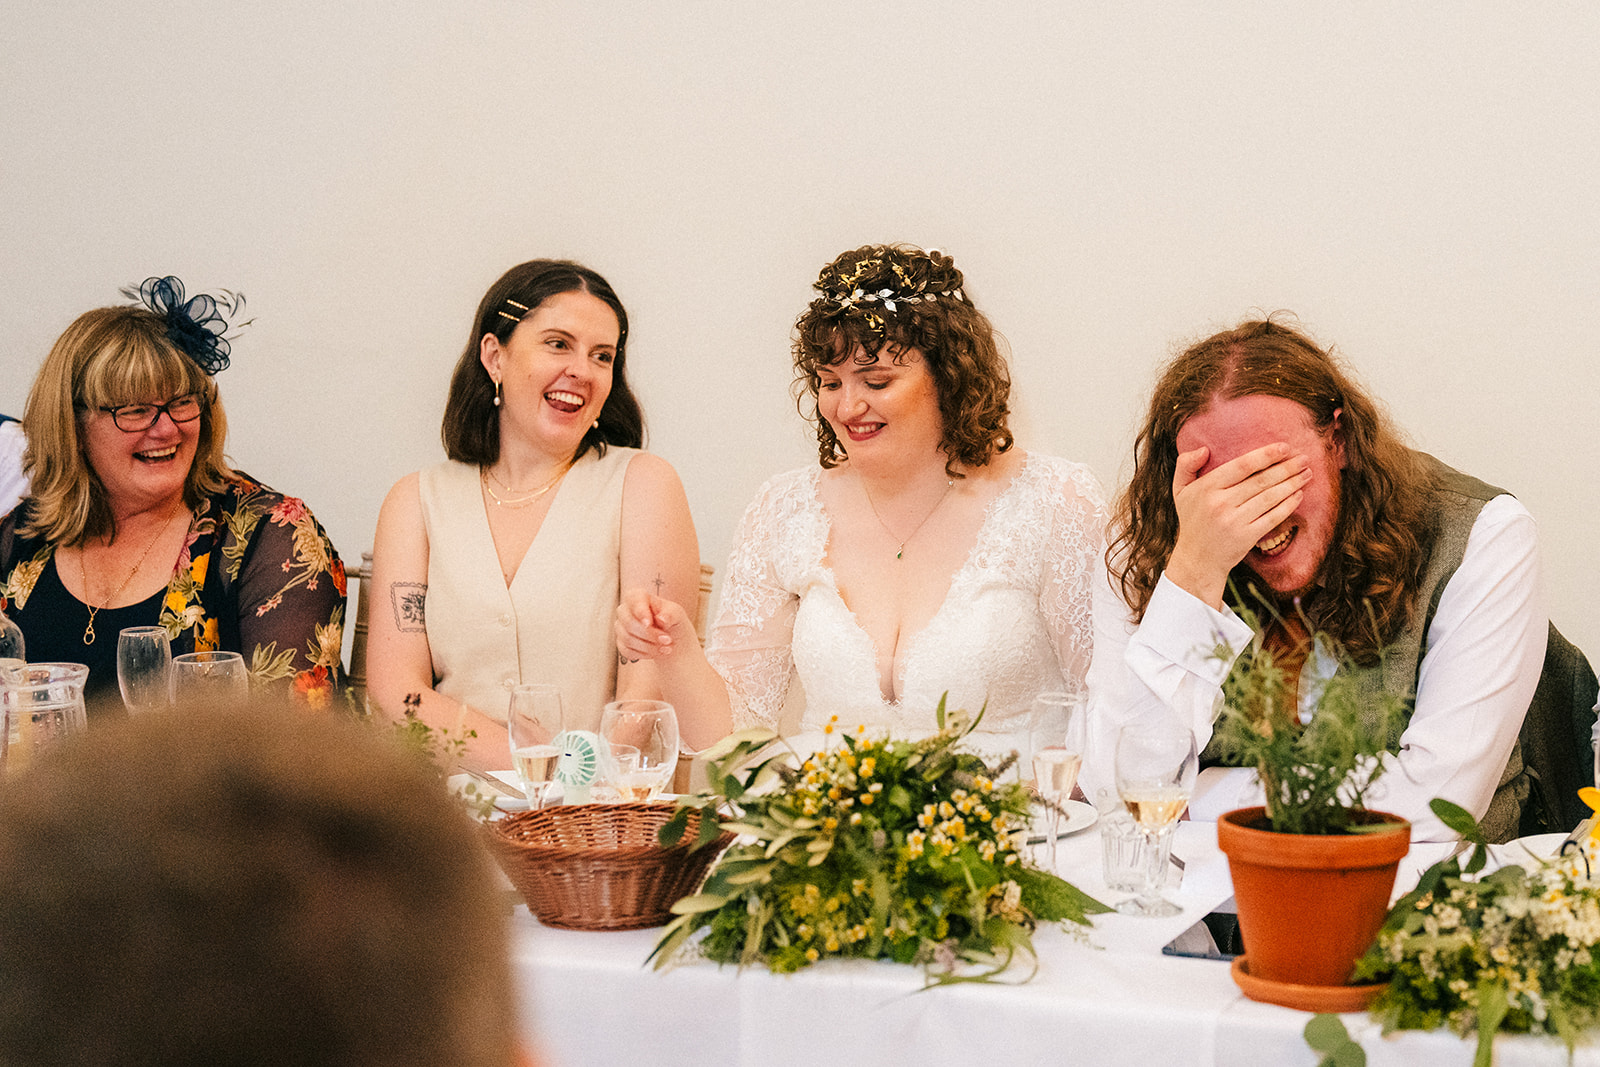 The groom reacts to an embarrassing story during the wedding speeches